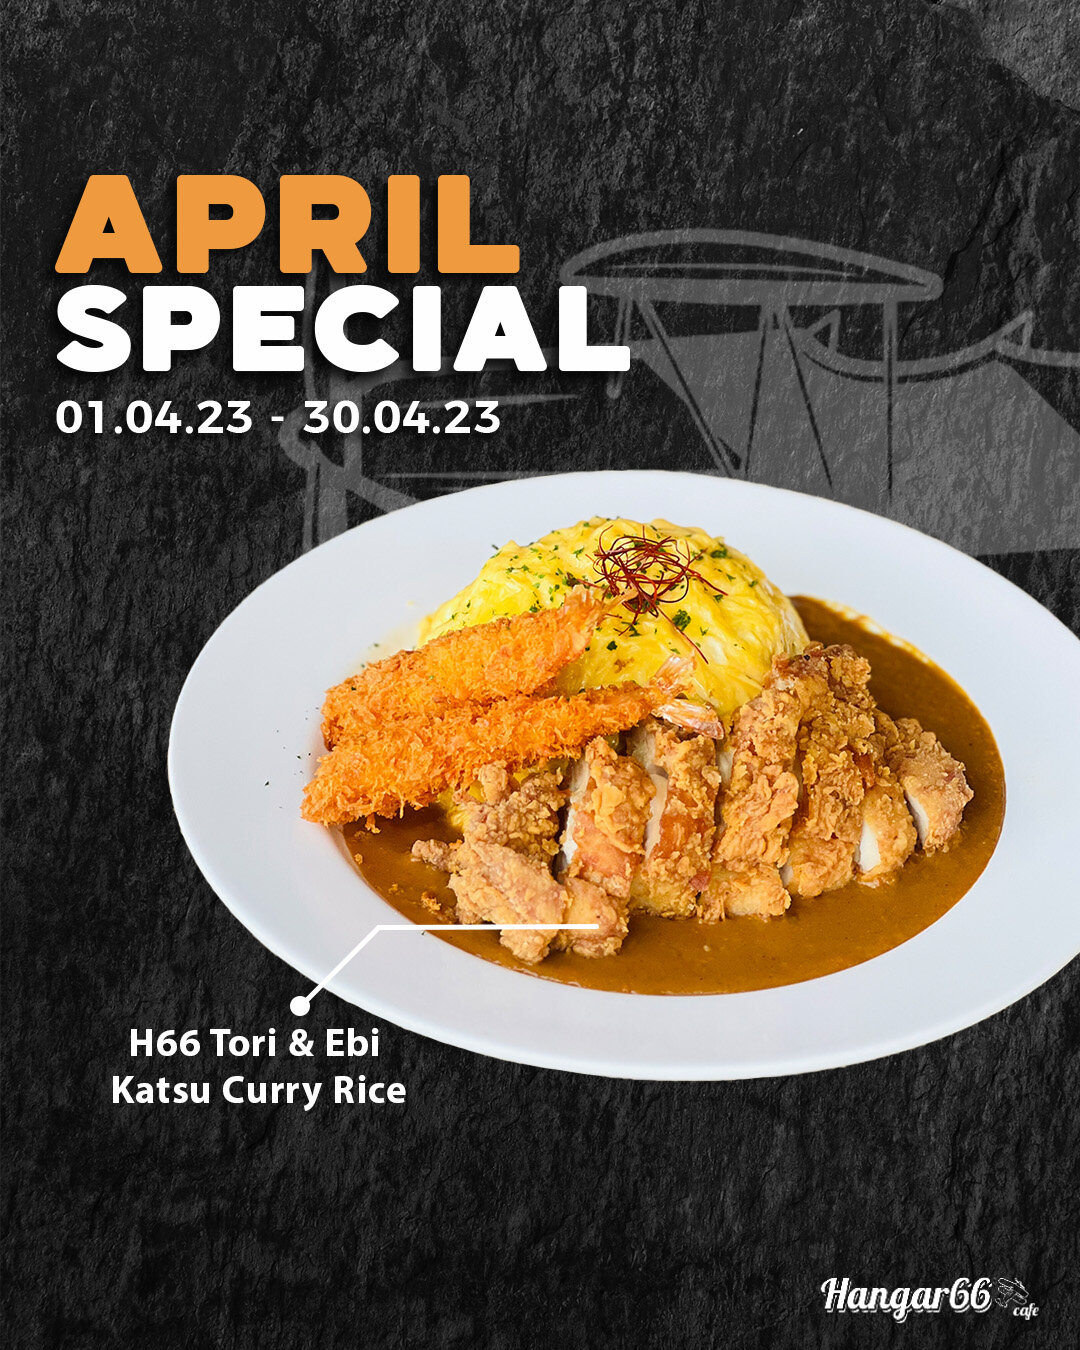 This month's special is the mouth-watering H66 Tori &amp; Ebi Katsu Curry Rice!

Featuring our signature homemade fried chicken and two succulent fried prawns, served on a bed of fragrant rice, and smothered in our special in-house curry sauce, this 